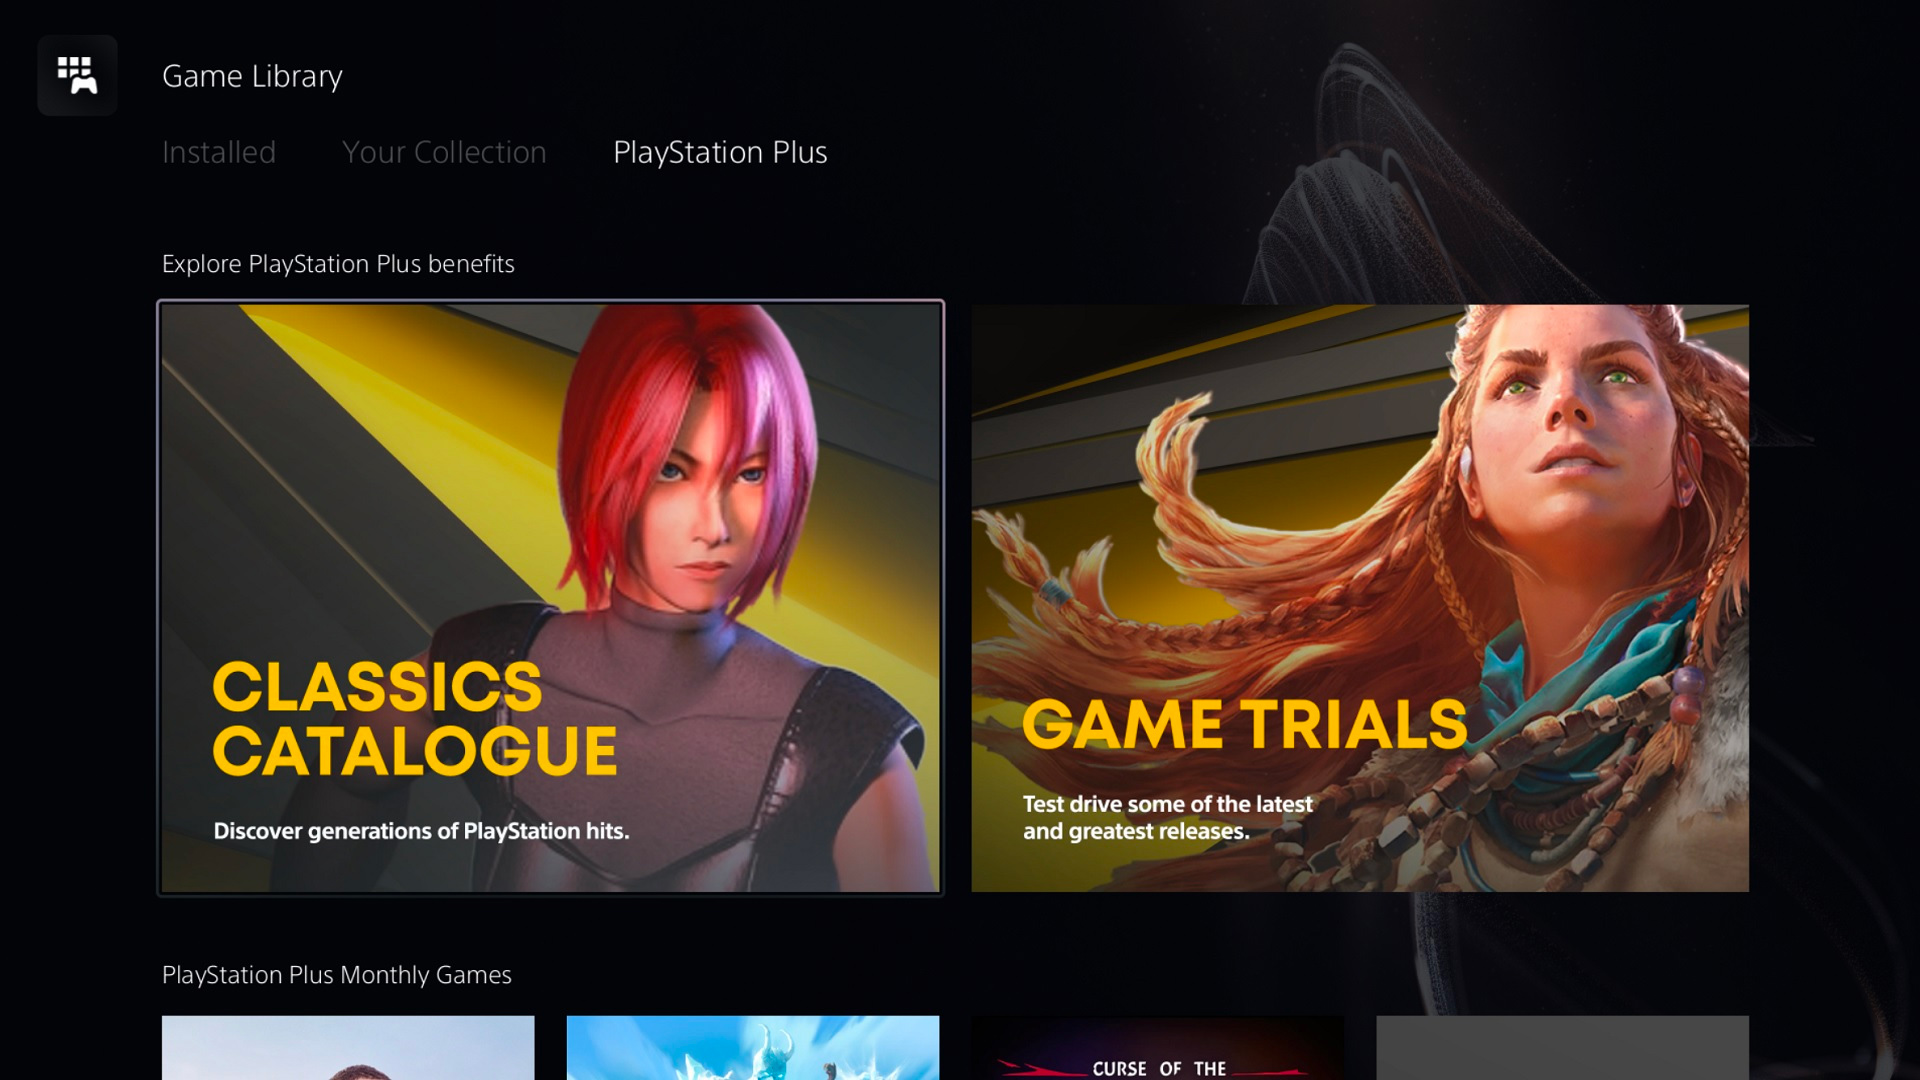 Dino Crisis will be among the titles in the PlayStation Plus Classics catalog